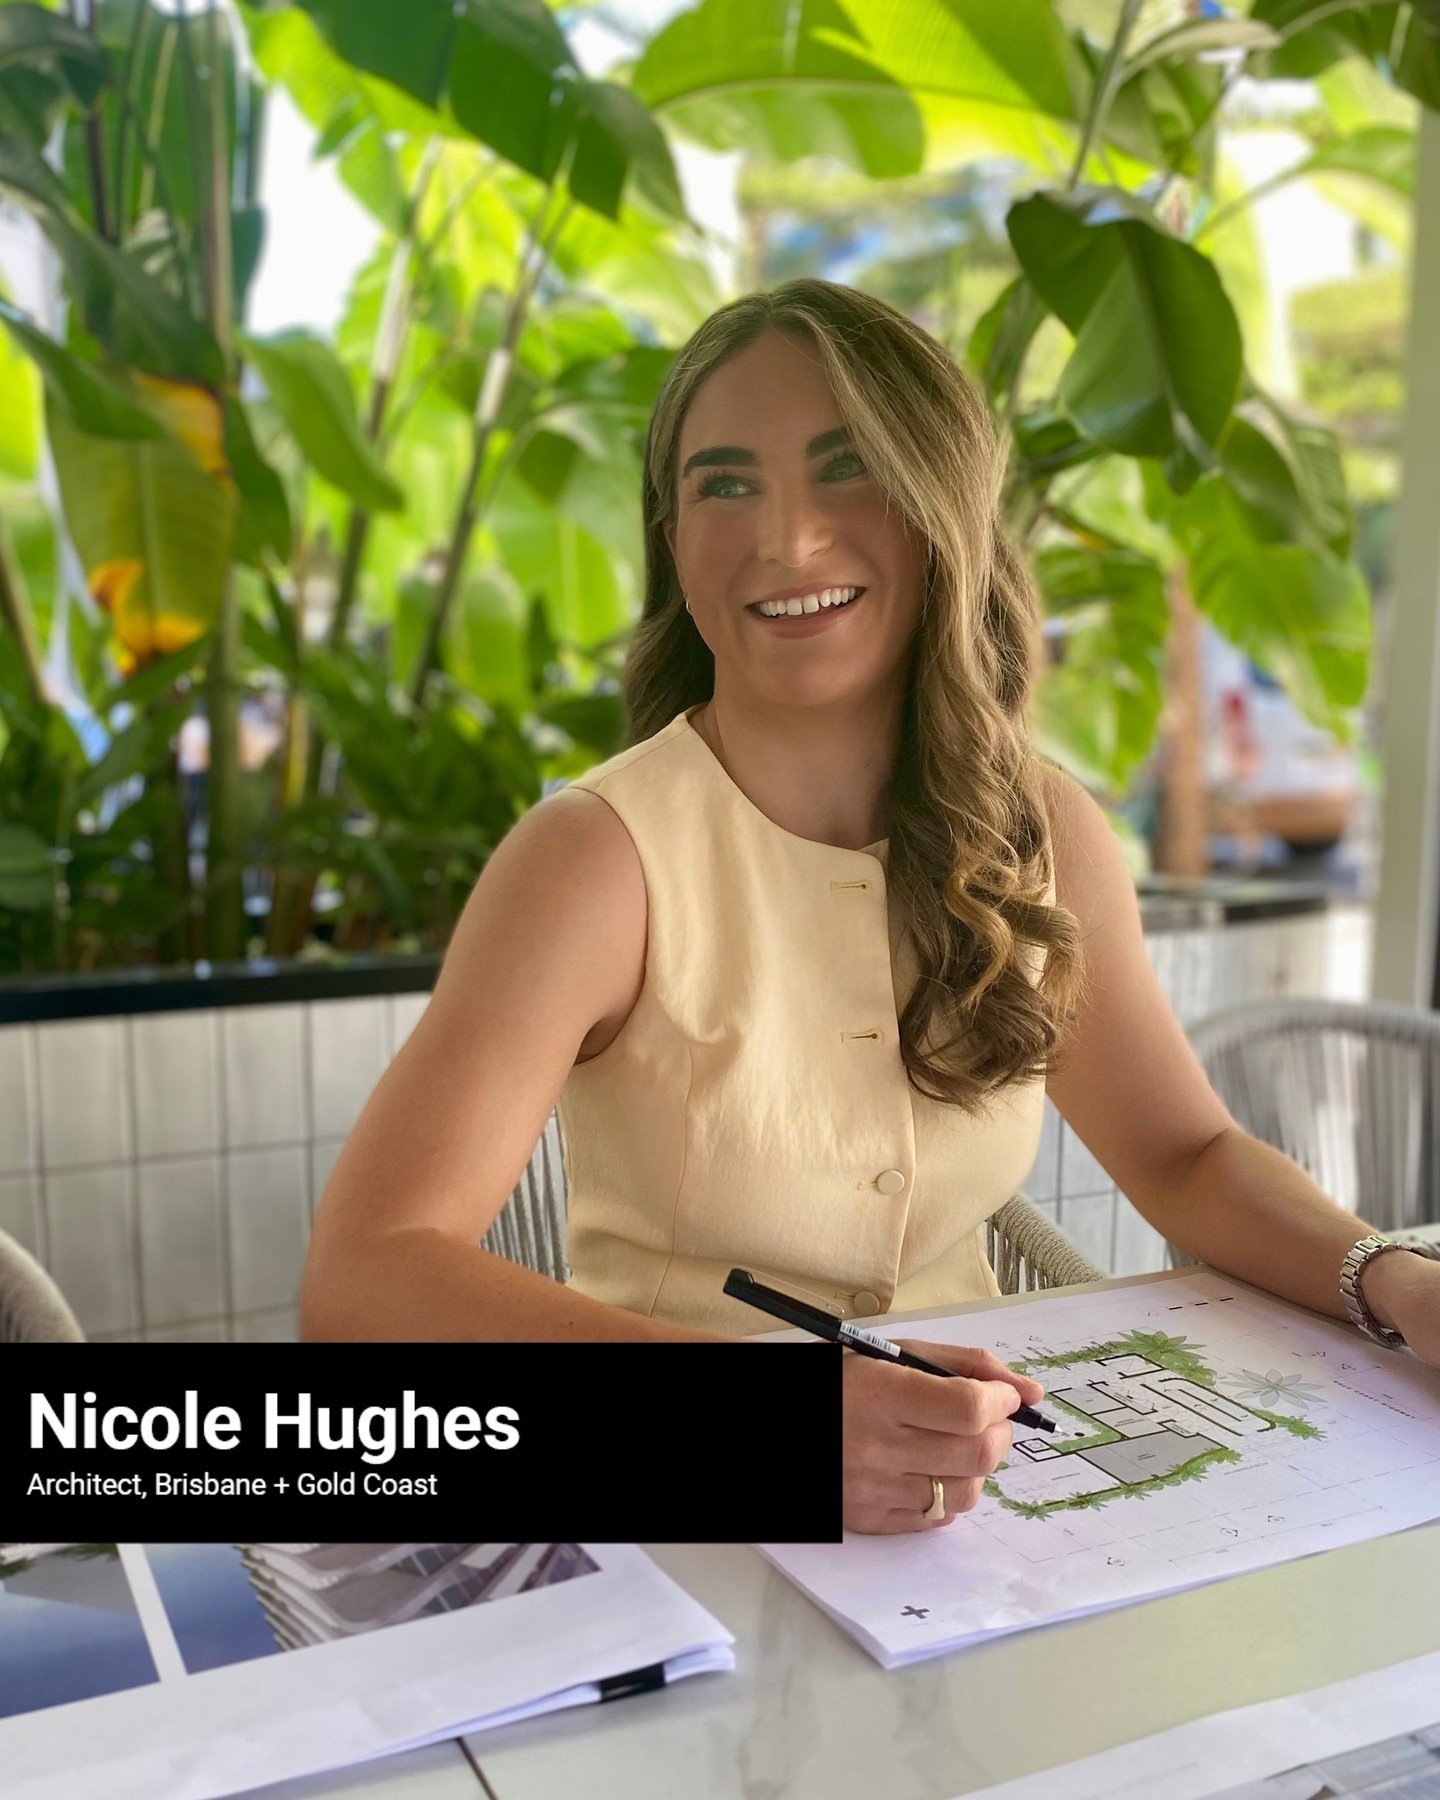 RECENT REGISTRATION⁠
⁠
A huge congrats to Nicole Hughes, based out of our Gold Coast studio, who recently registered as an architect!⁠
⁠
Nicole joined Plus in 2022 and has continued her passion for designing beautiful and functional spaces that promo